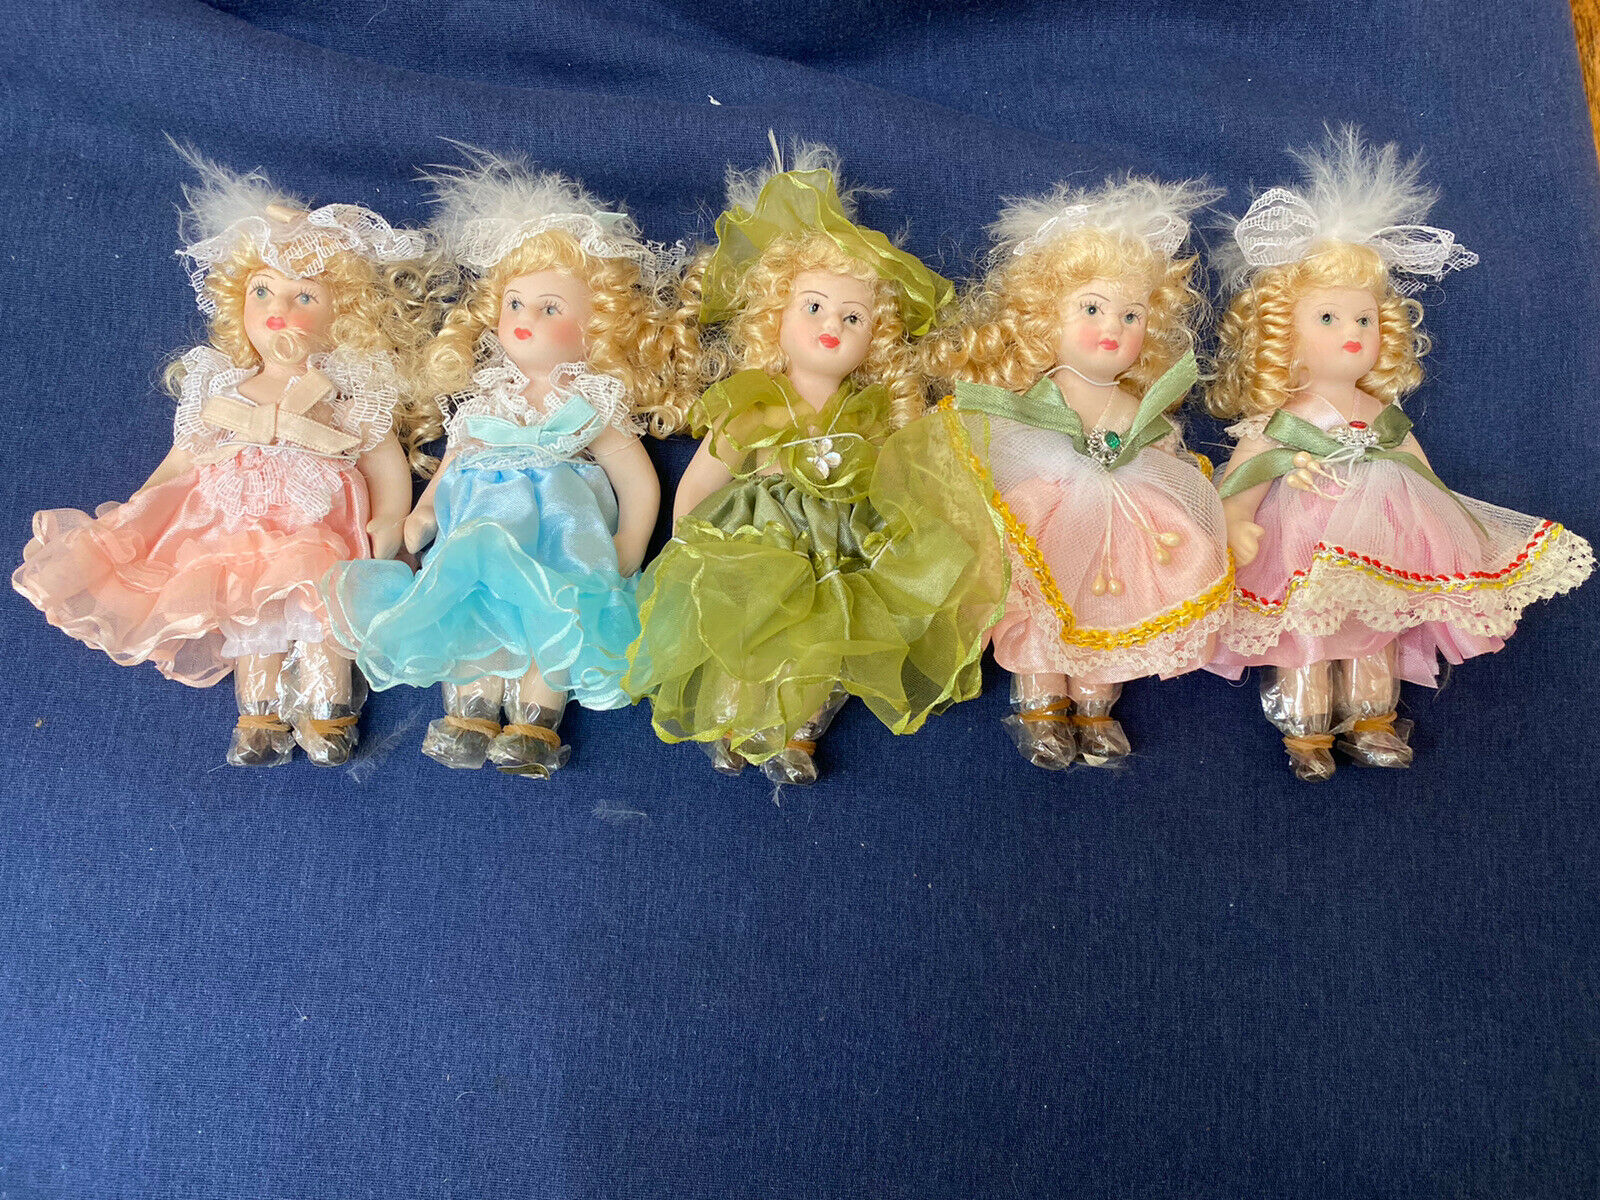 Vintage Nwb Set Of 5 Hand Painted Poseable Porcelain Doll Ornament 5" Tall